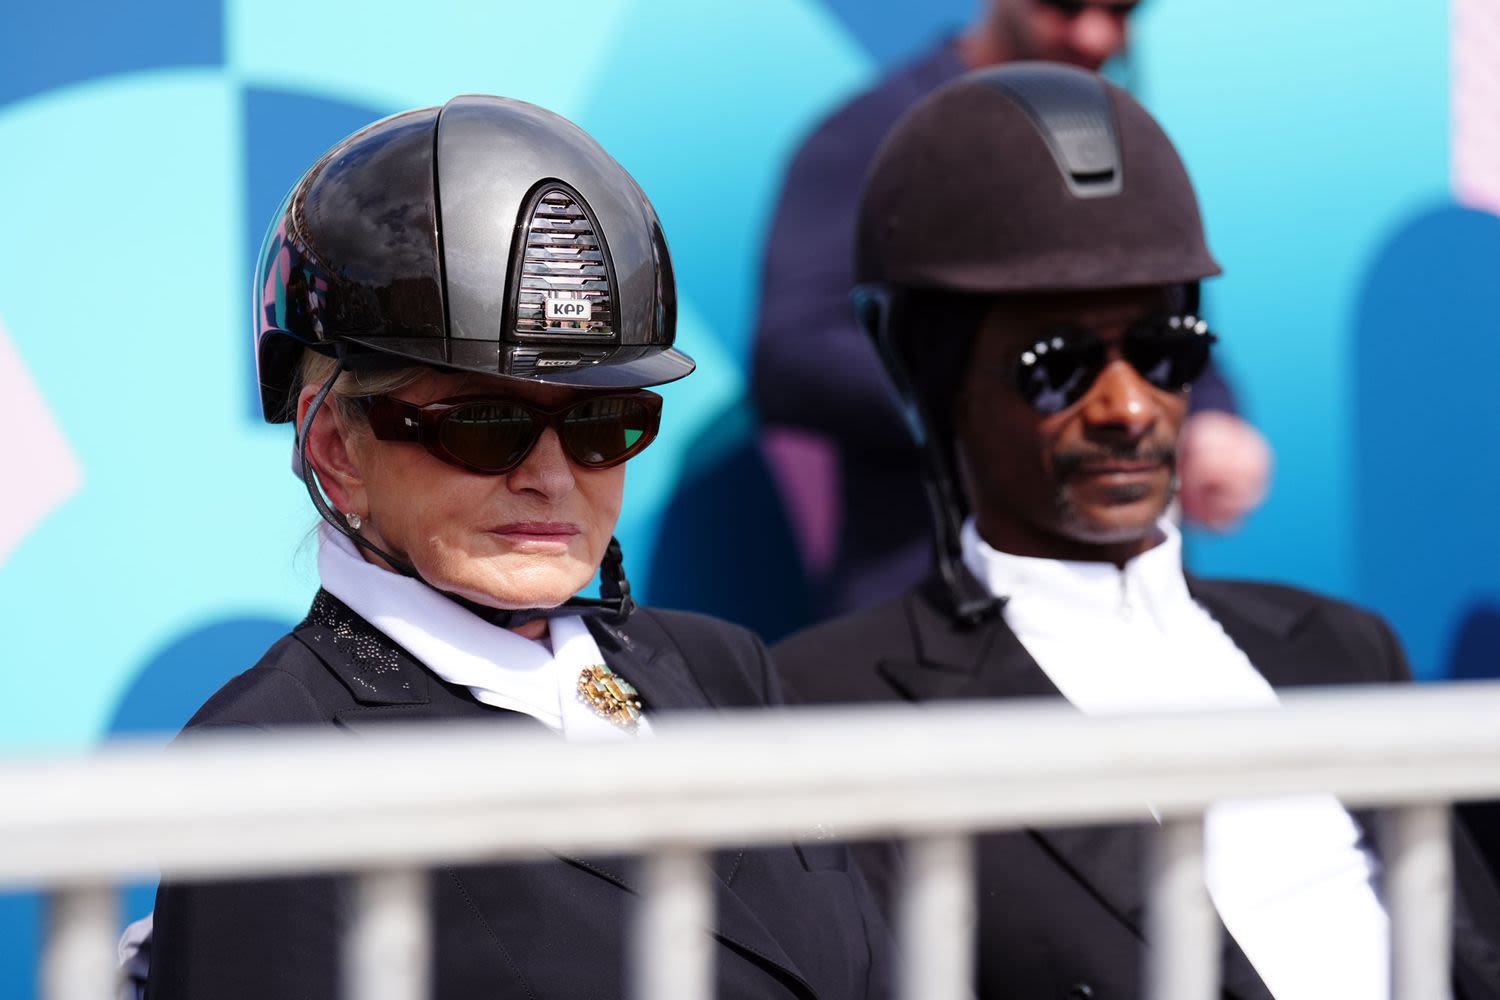 Martha Stewart Rings in Her 83rd Birthday with Snoop Dogg in Paris at the Olympics Dressage Event